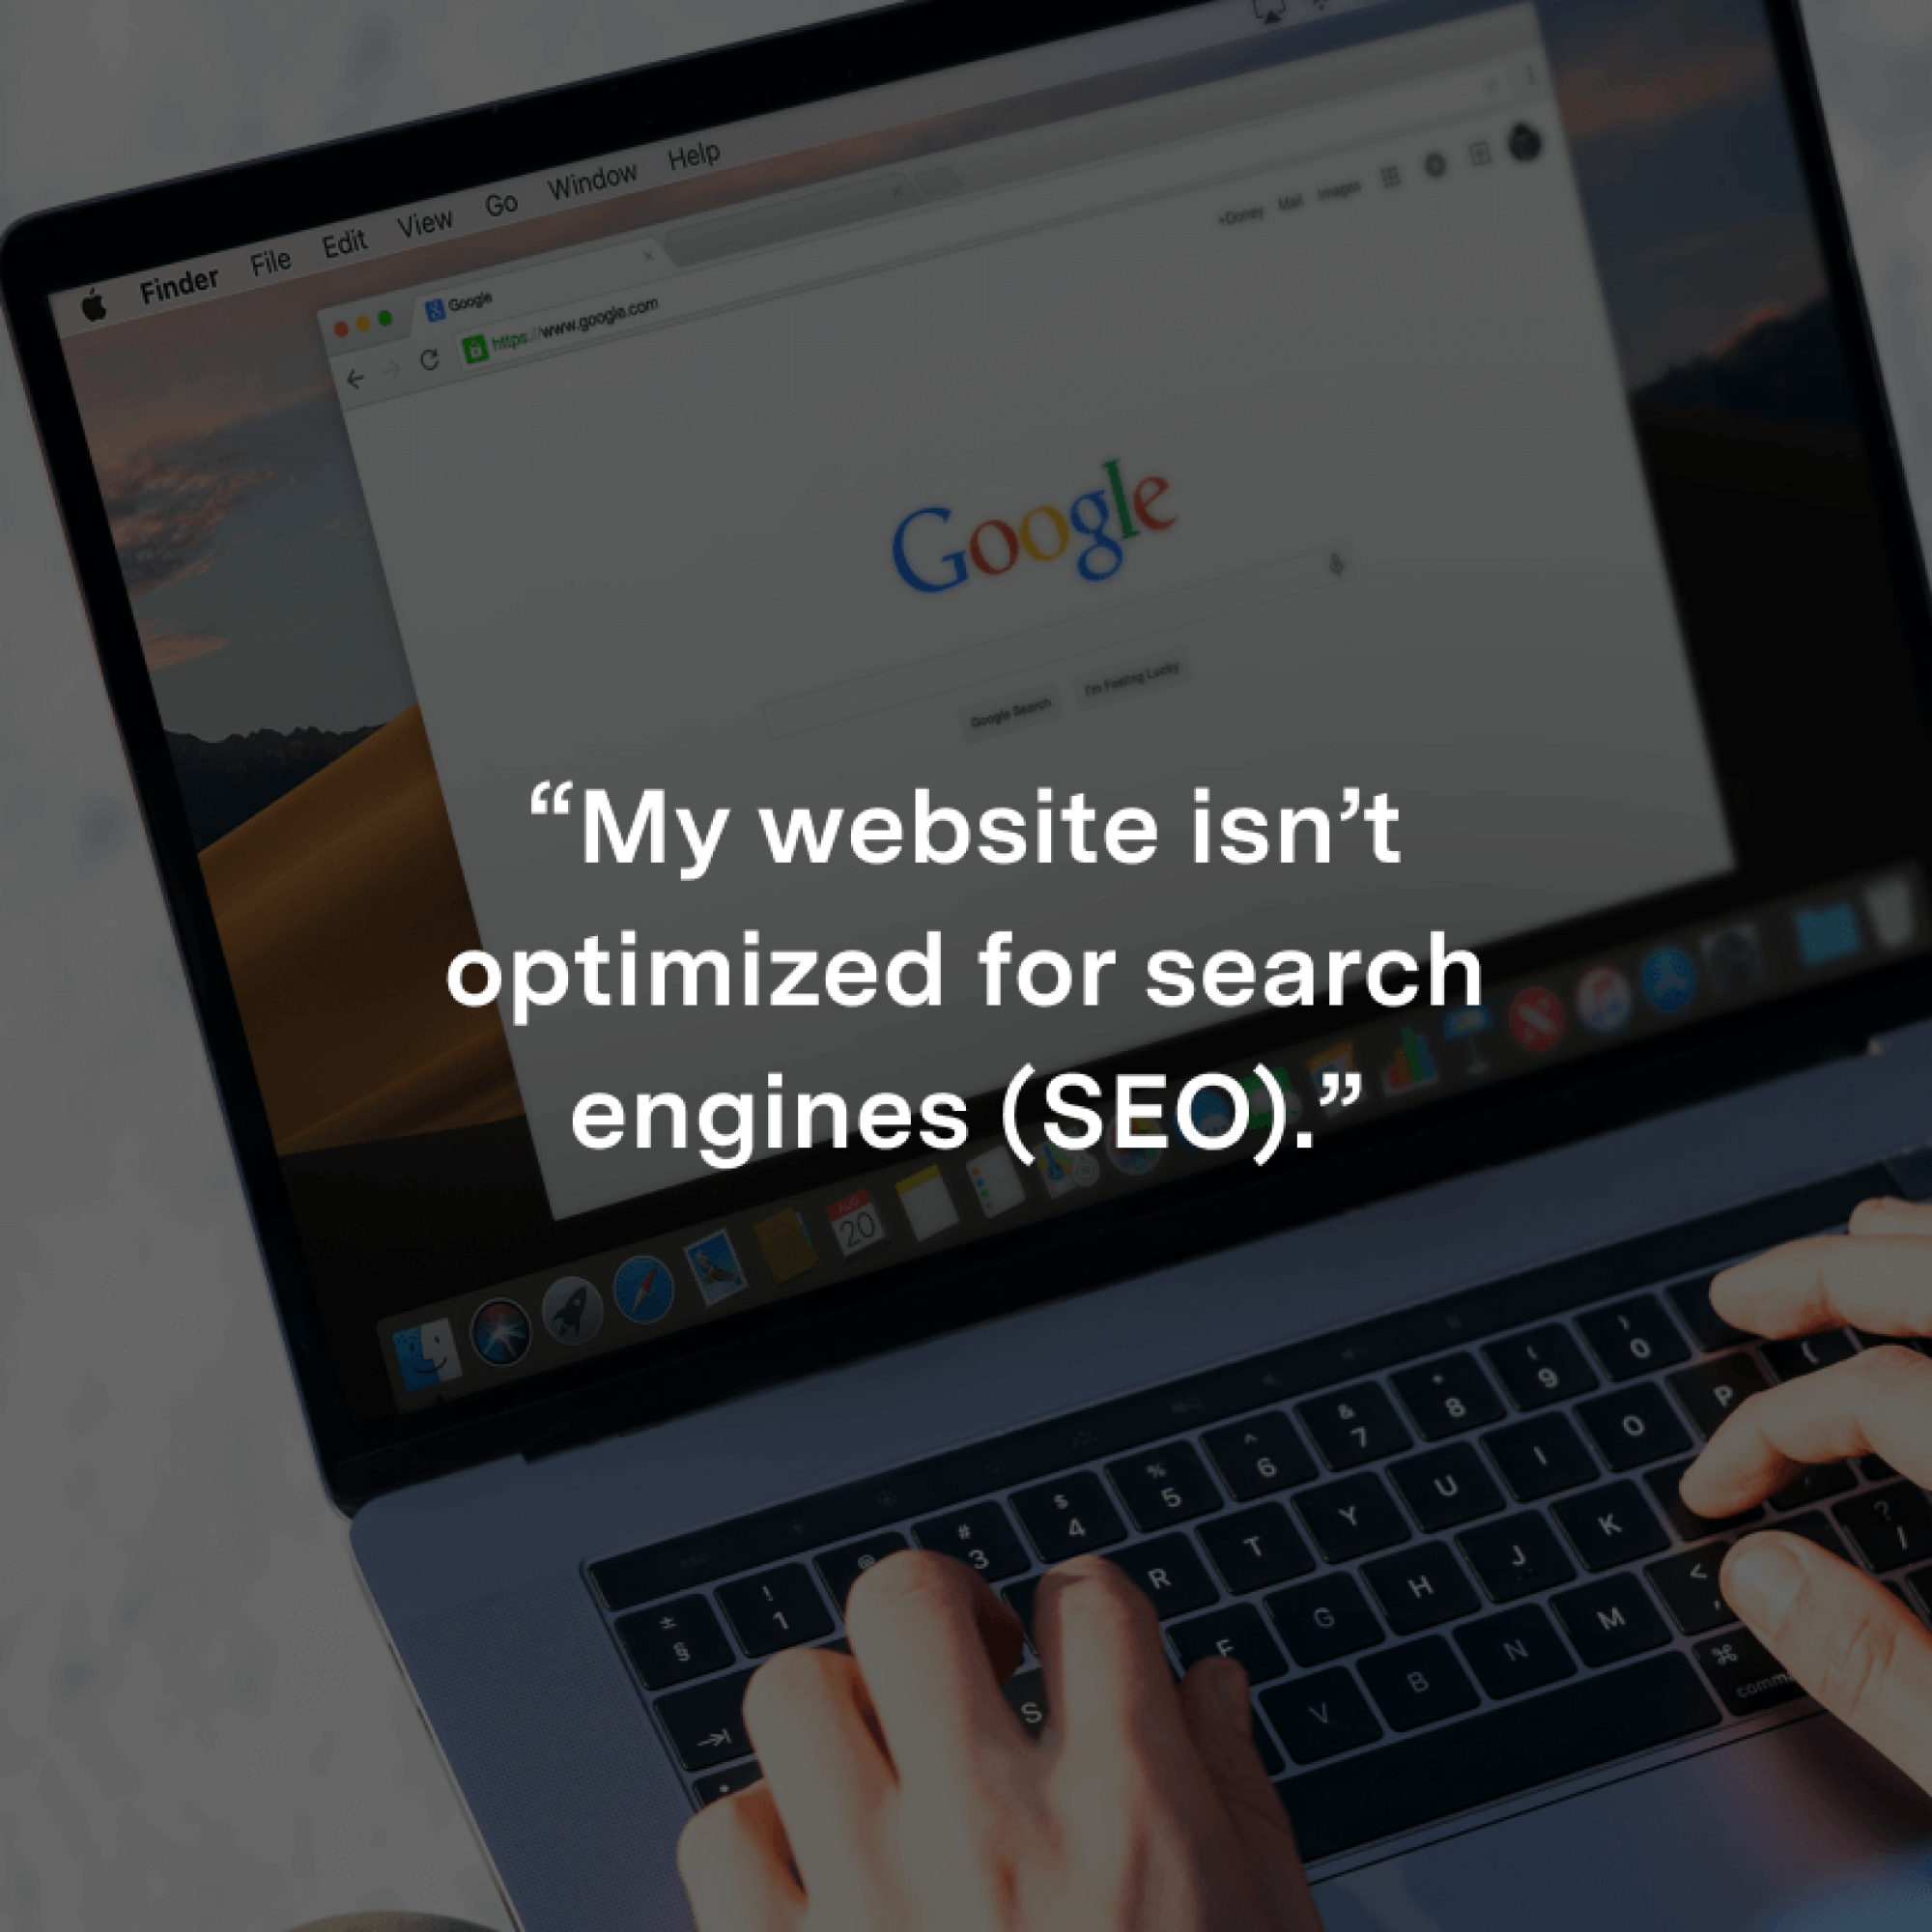 My website isn’t optimized for search engines (SEO).